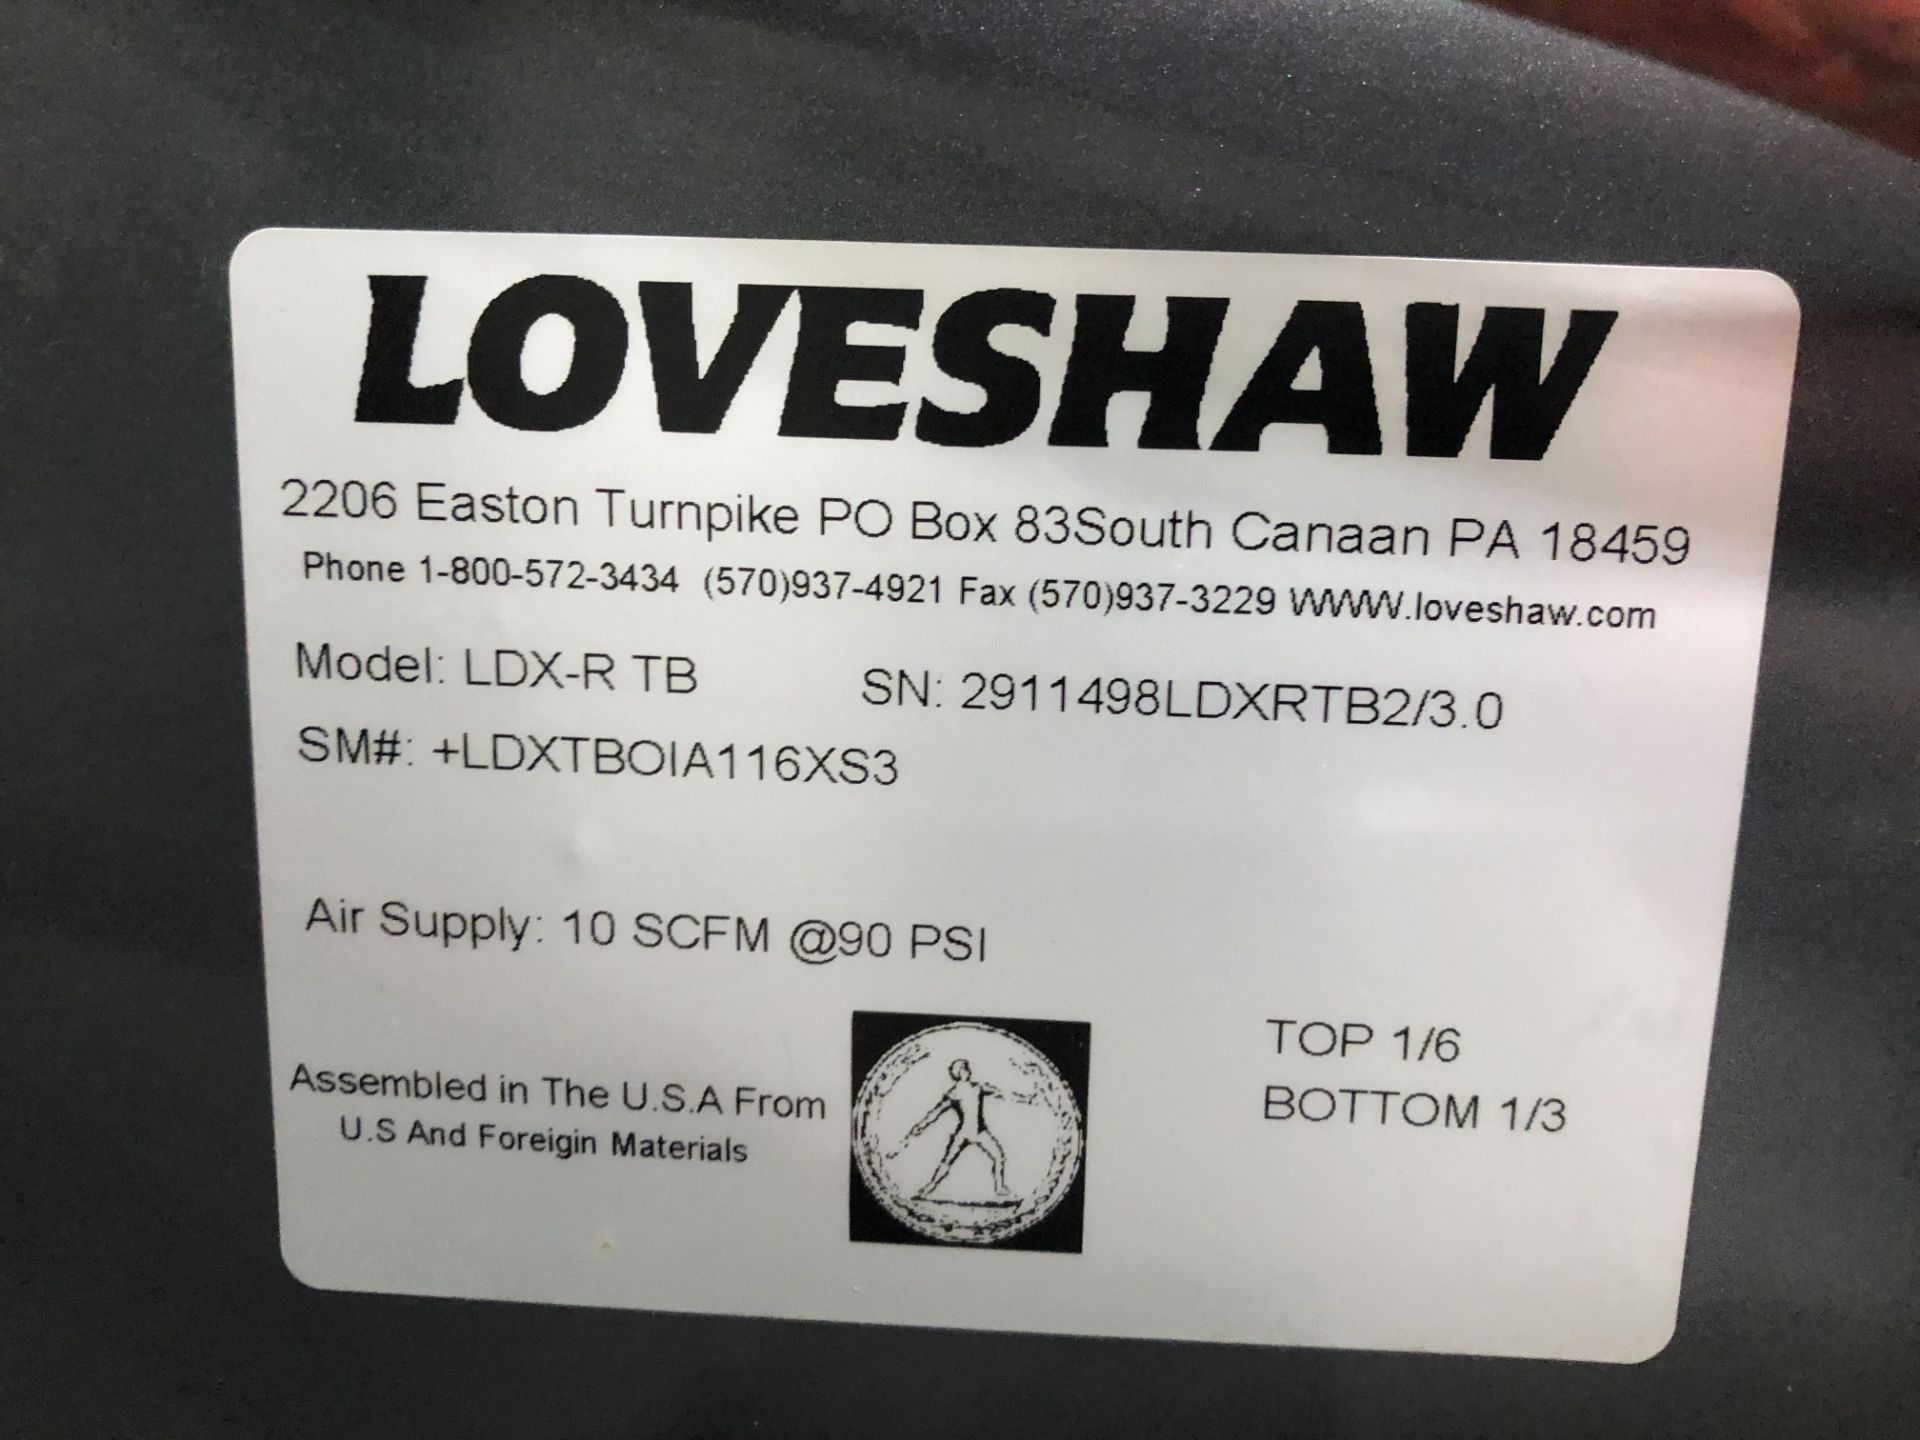 Little David Loveshaw Model #LDX-R TB, Serial # 2911498LDXRTB2/3.0 top and bottom case taper - - Image 2 of 2